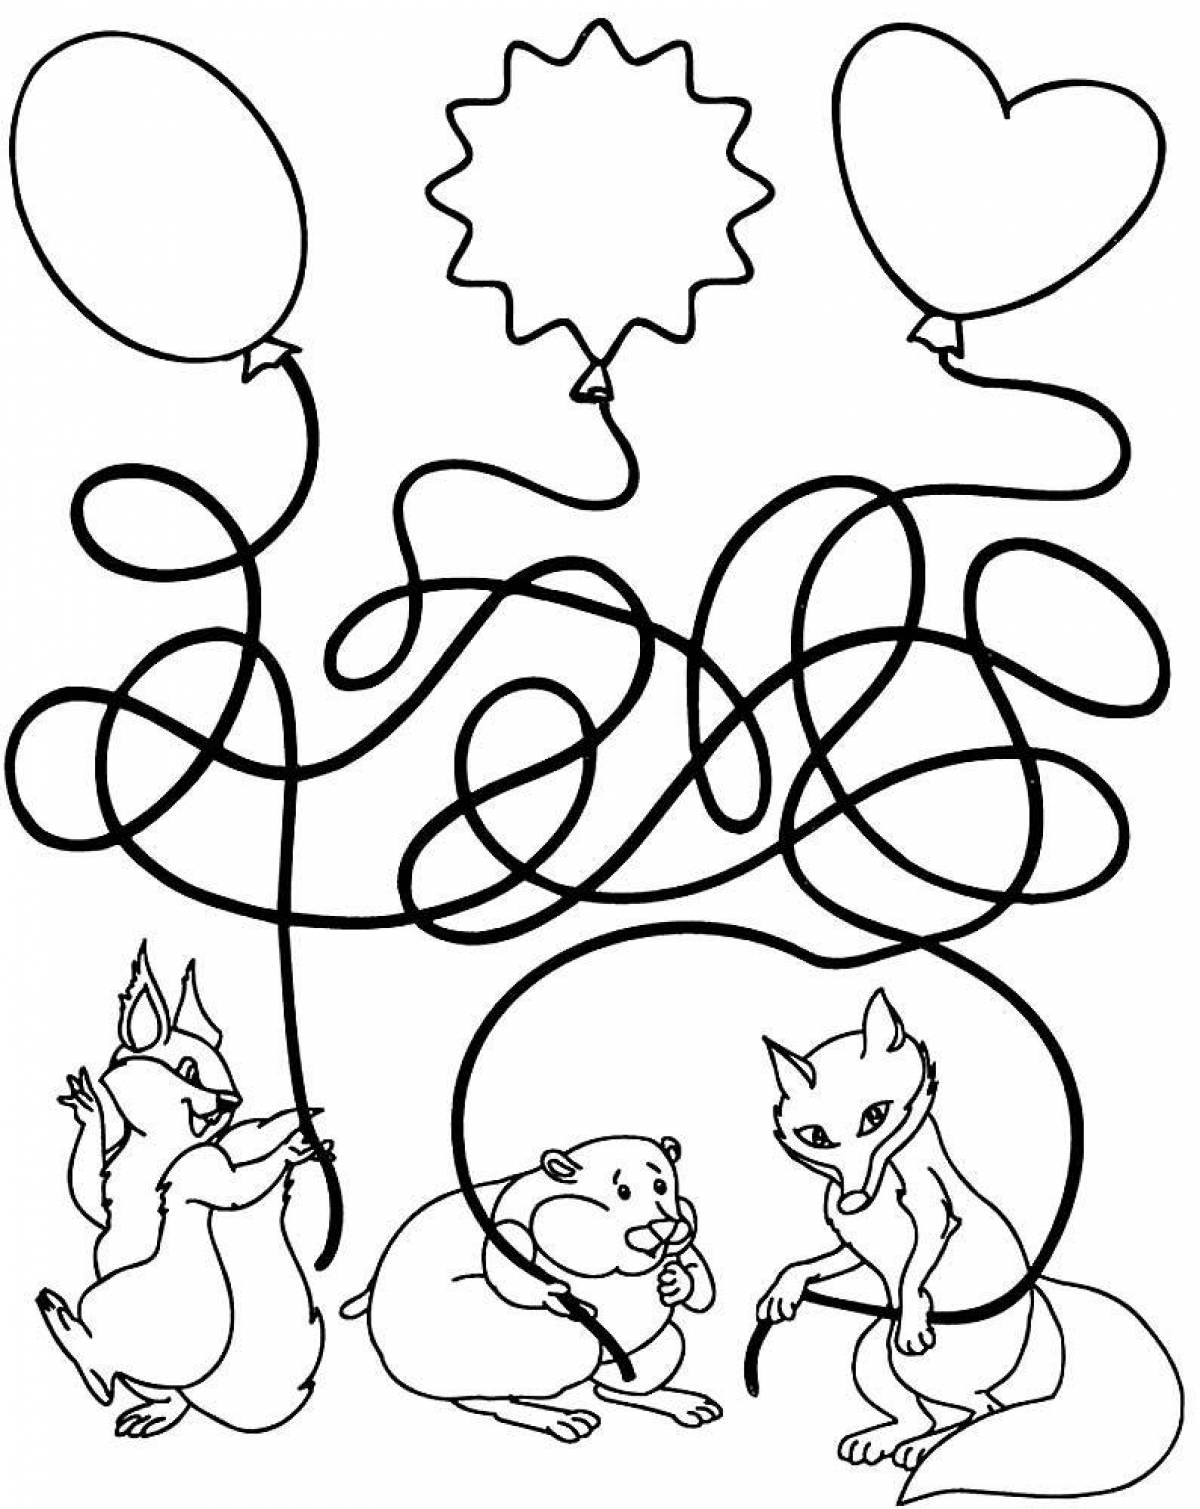 Invitation to confusion coloring page